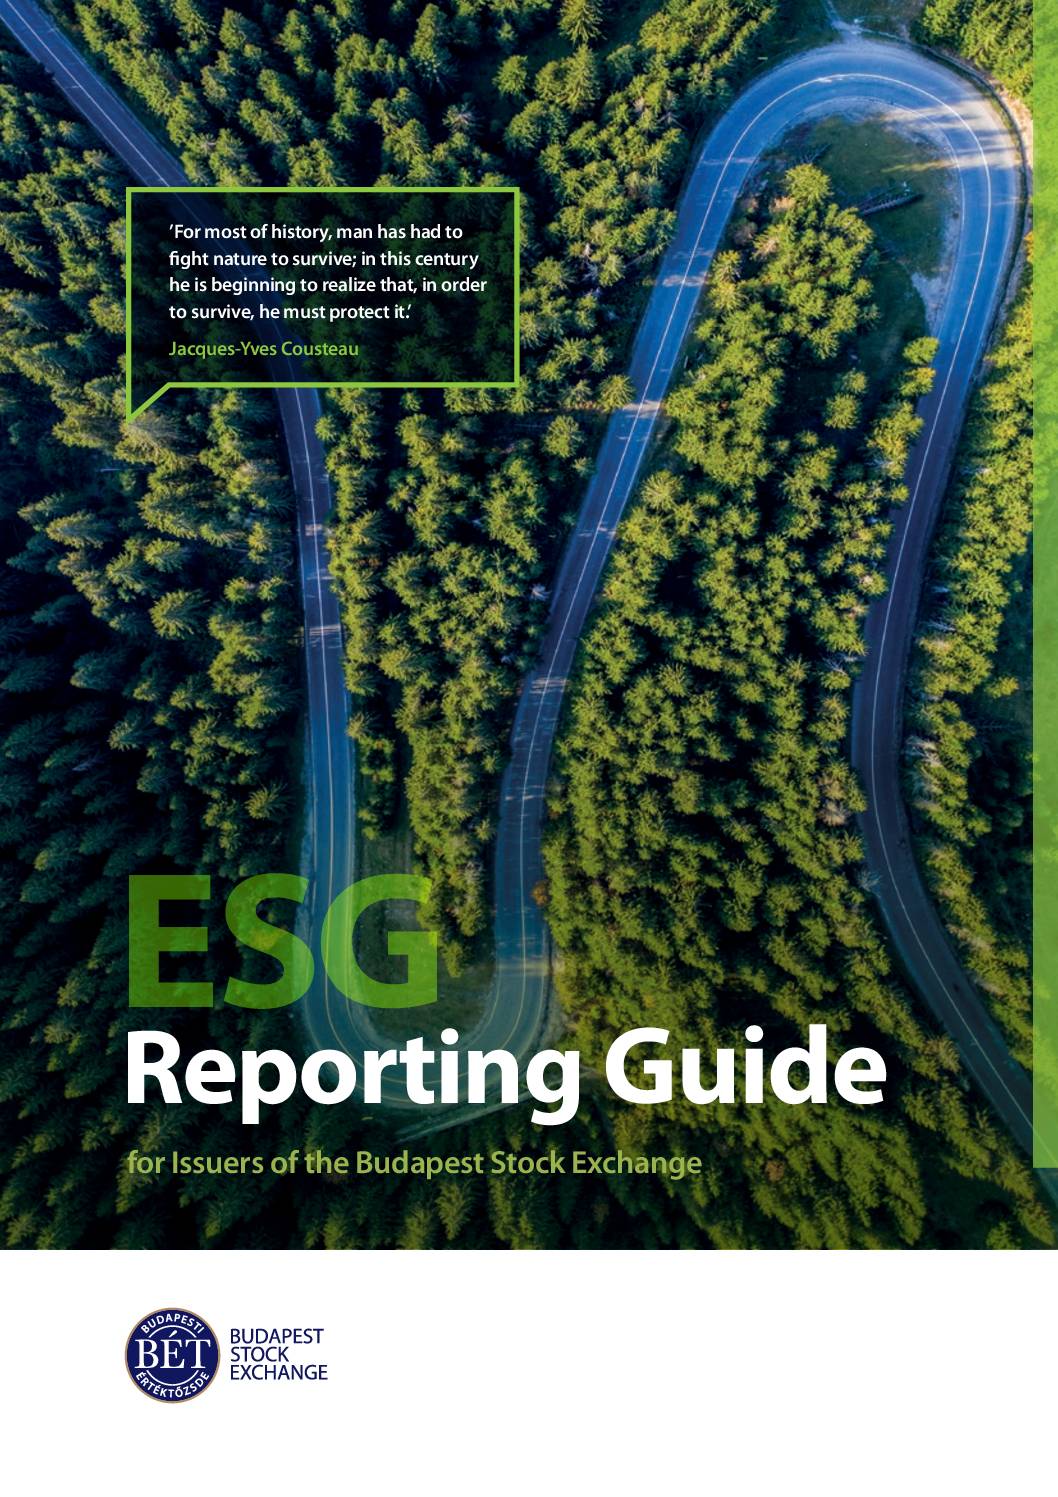 ESG Reporting Guide: For Issuers of the Budapest Stock Exchange